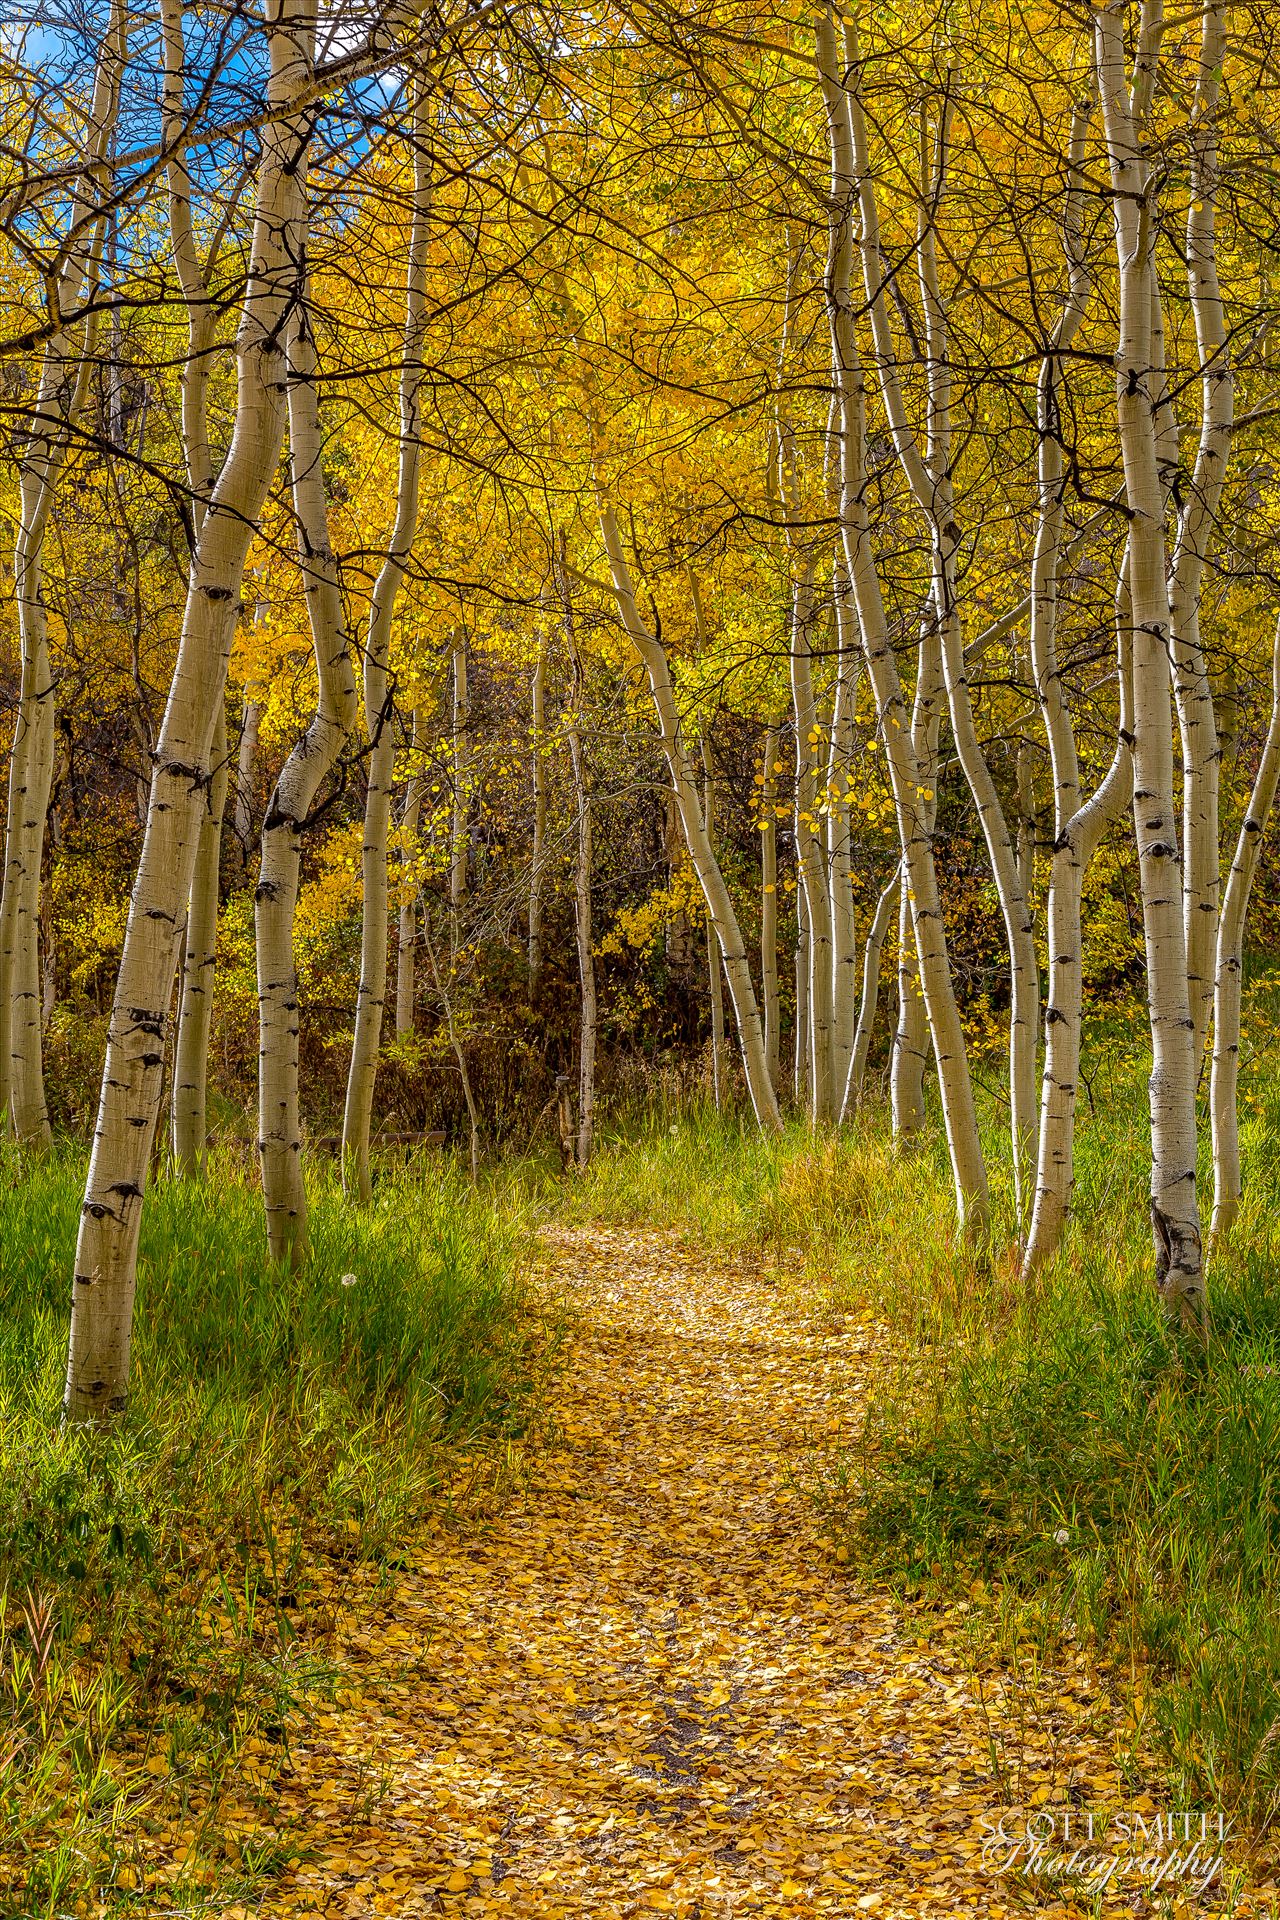 Rim Trail Aspens - Beautiful aspens showing their fall colors along Rim Trail in Snowmass by Scott Smith Photos